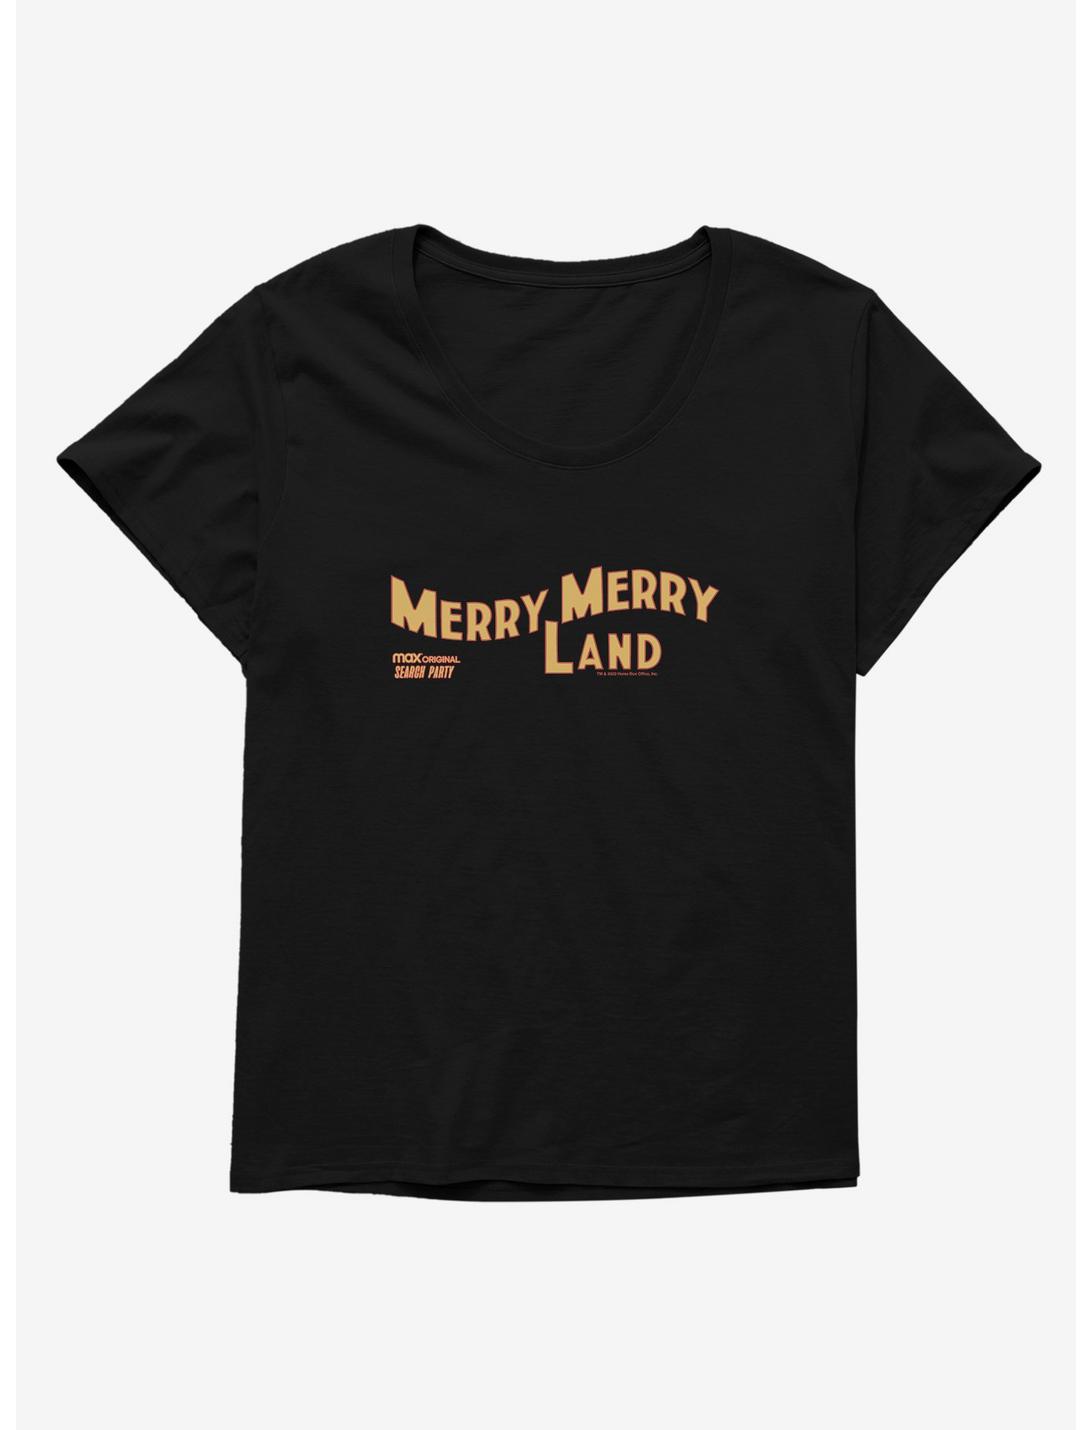 Search Party Merry Merry Land Womens T-Shirt Plus Size, , hi-res